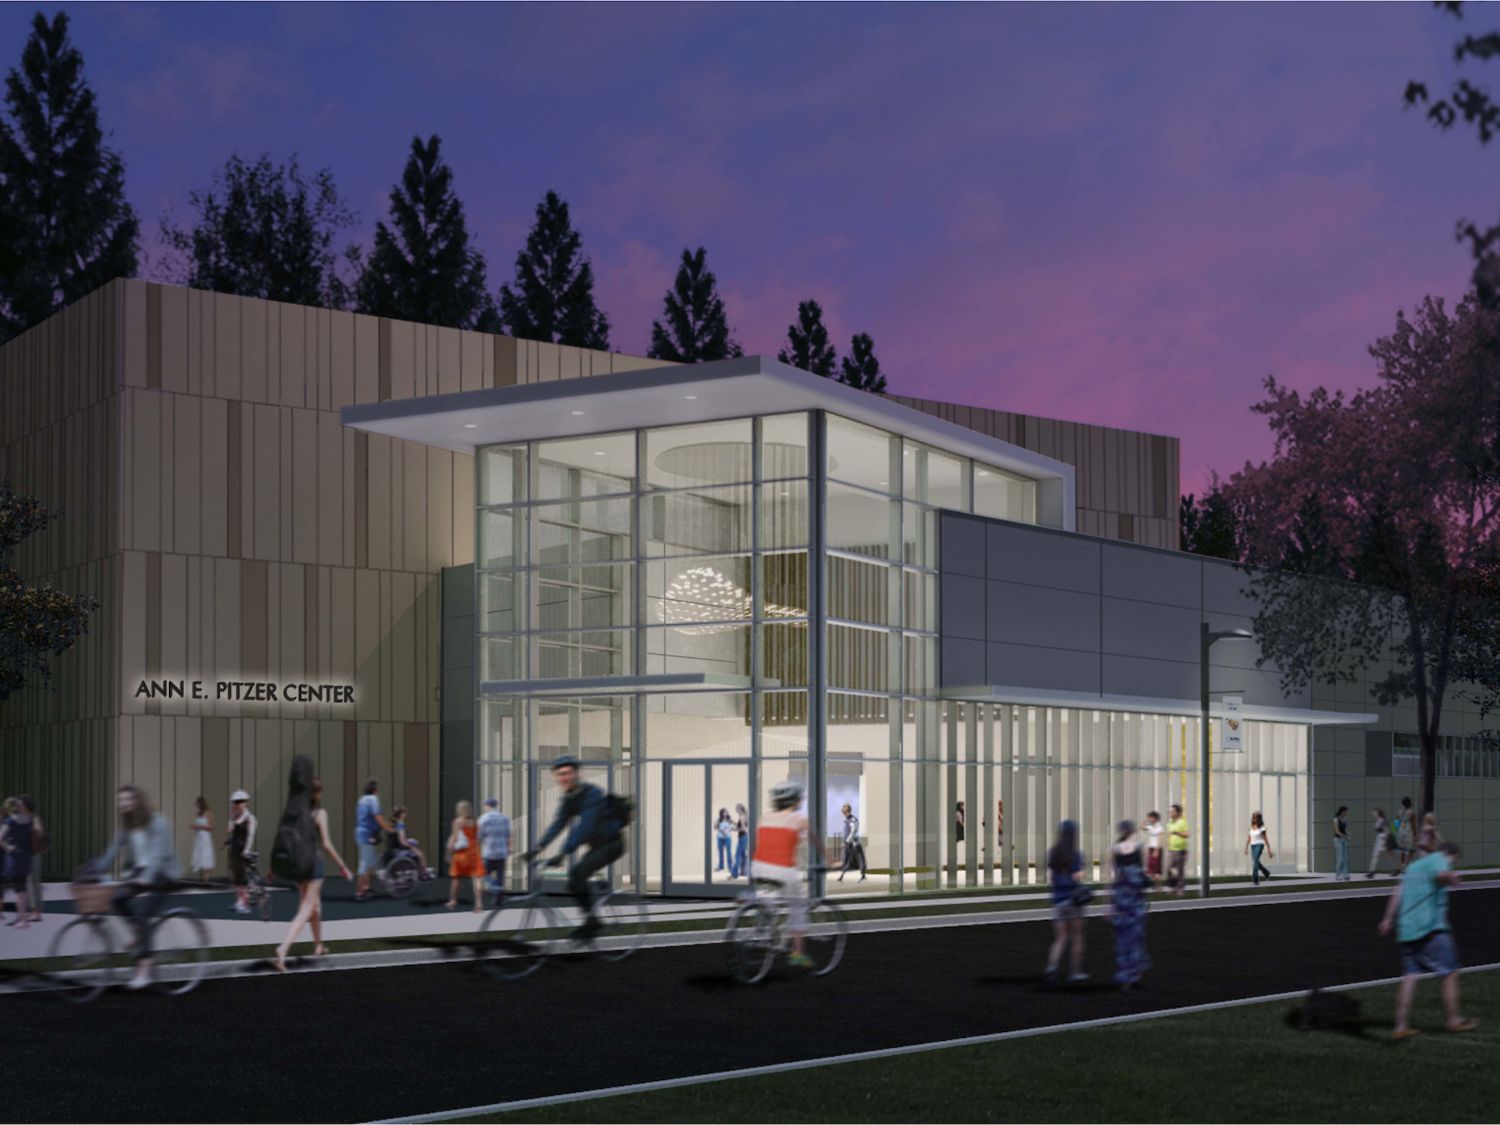 Drawing of the Ann E. Pitzer Center